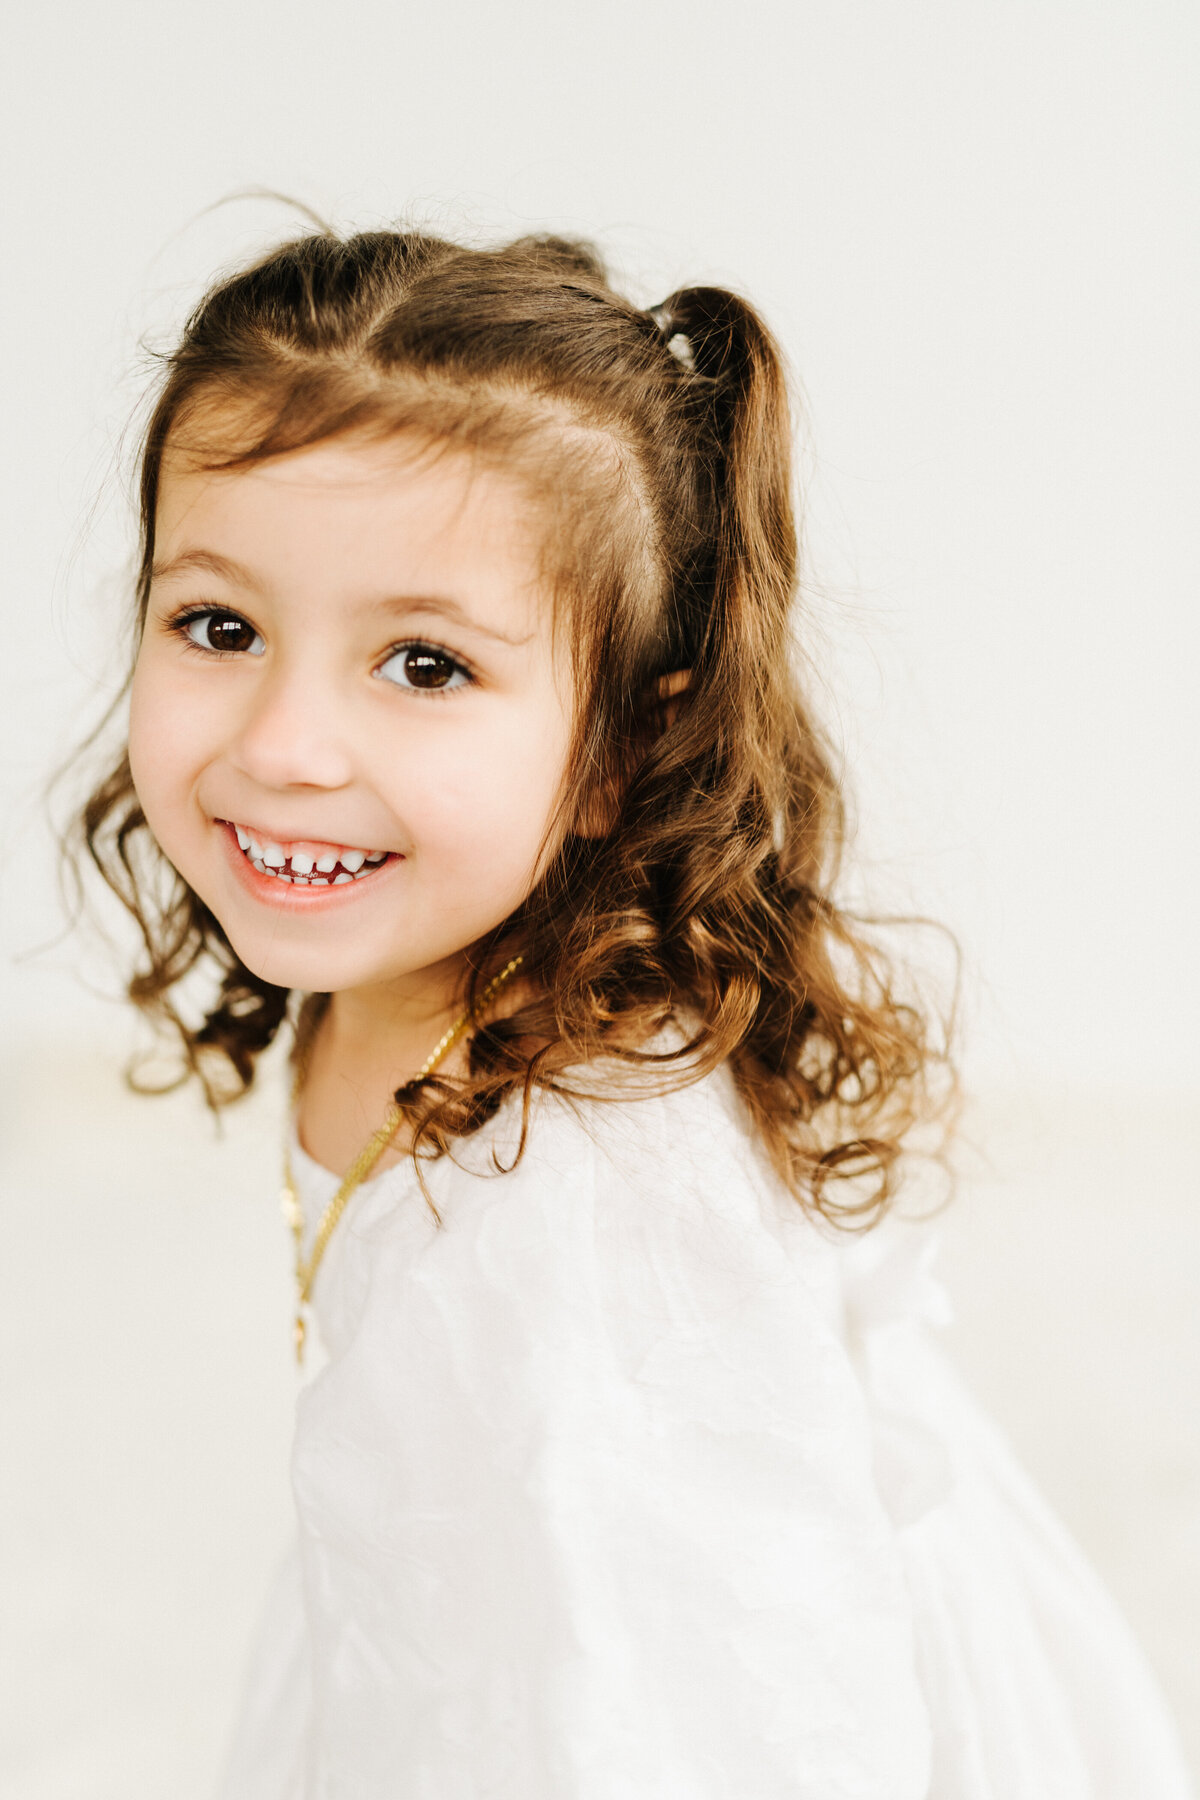 smiling little girl with curly brown hair